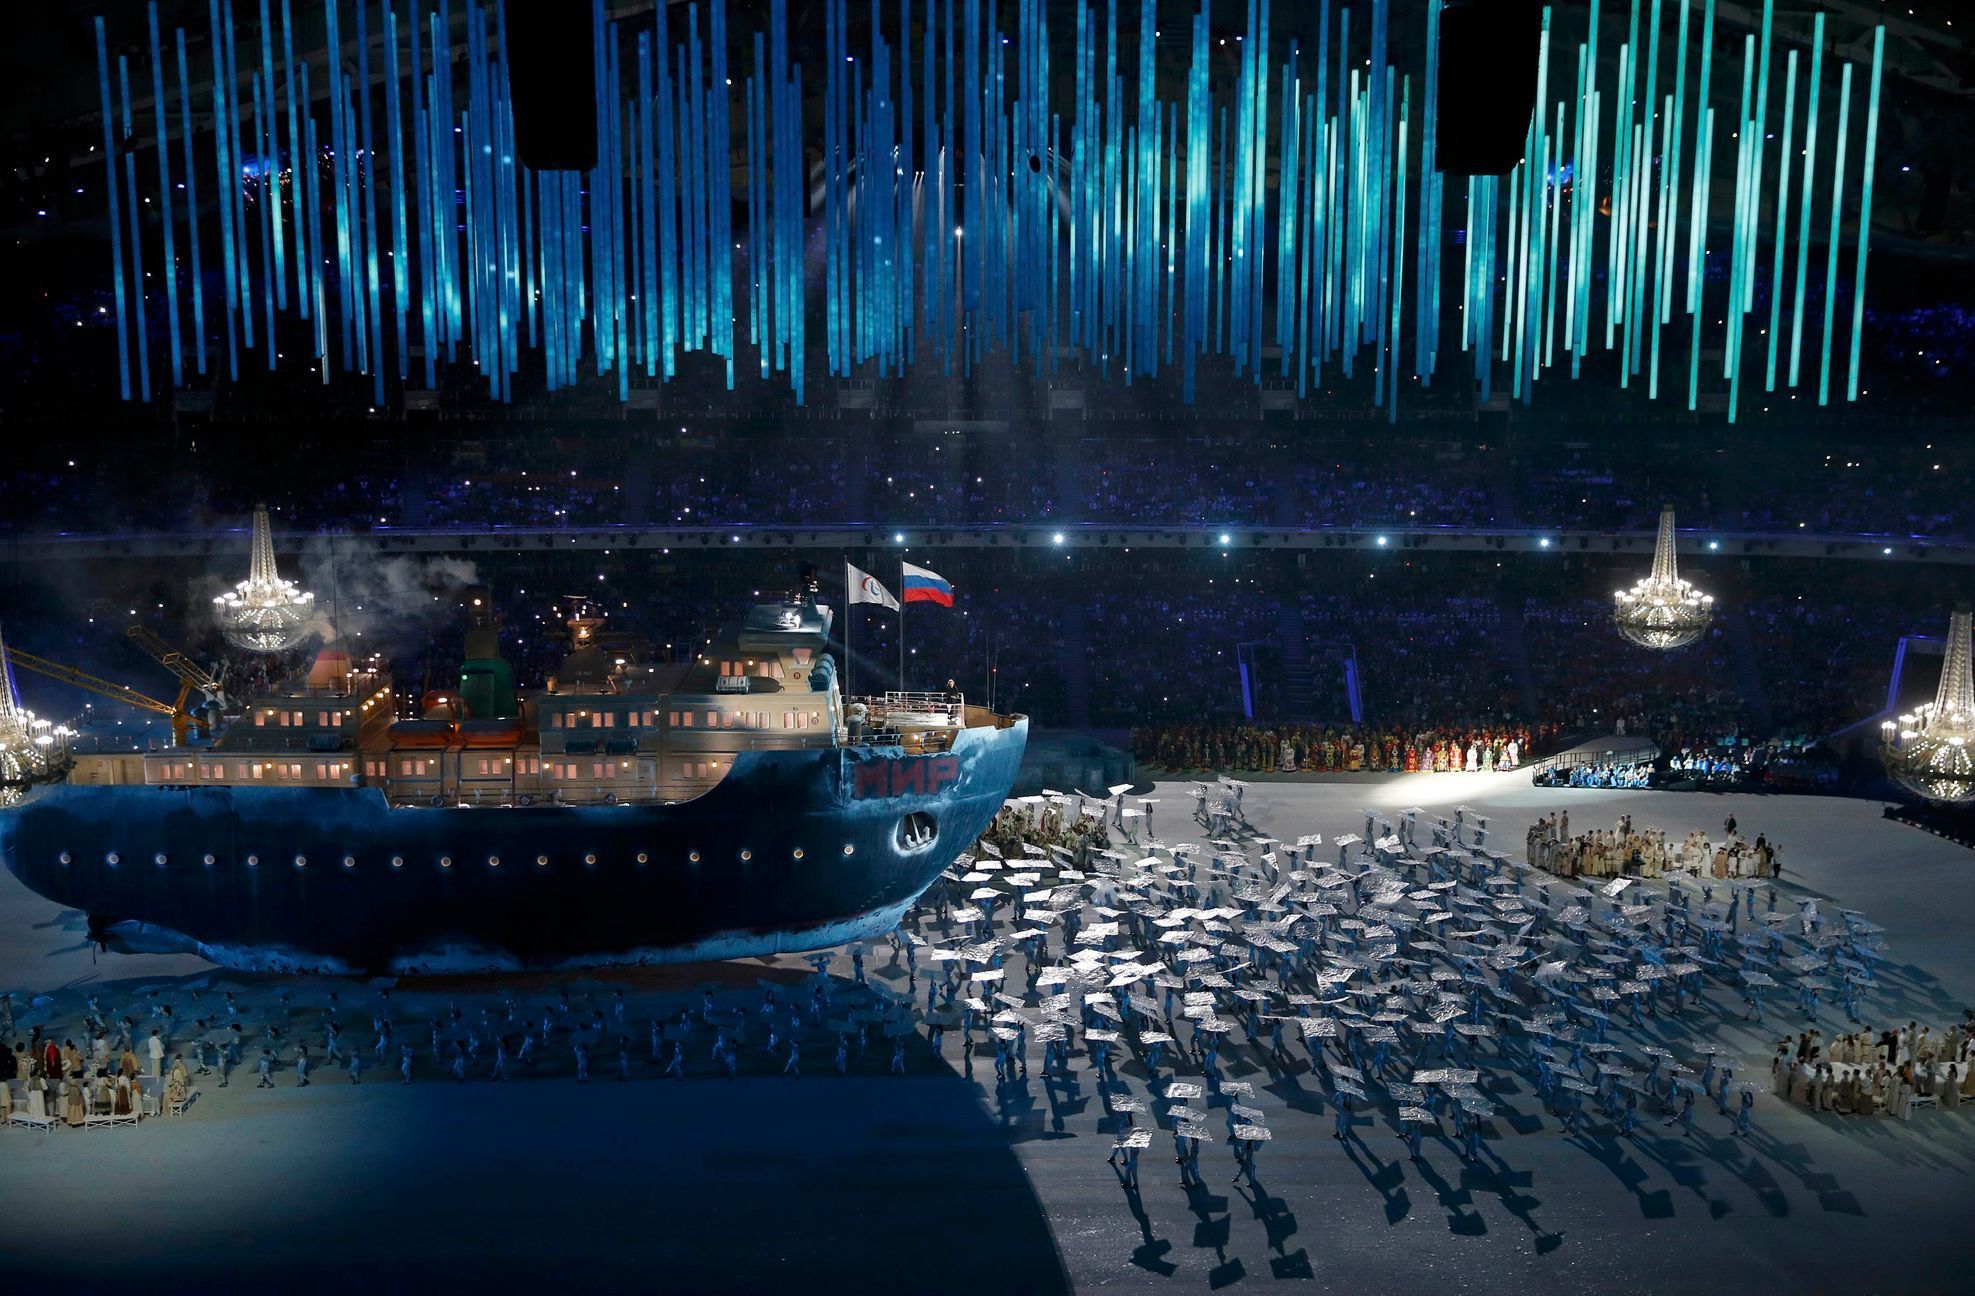 An icebreaker ship called 'Peace' carries the Paralympic and Russian flags during the opening ceremony of the 2014 Paralympic Winter Games in Sochi